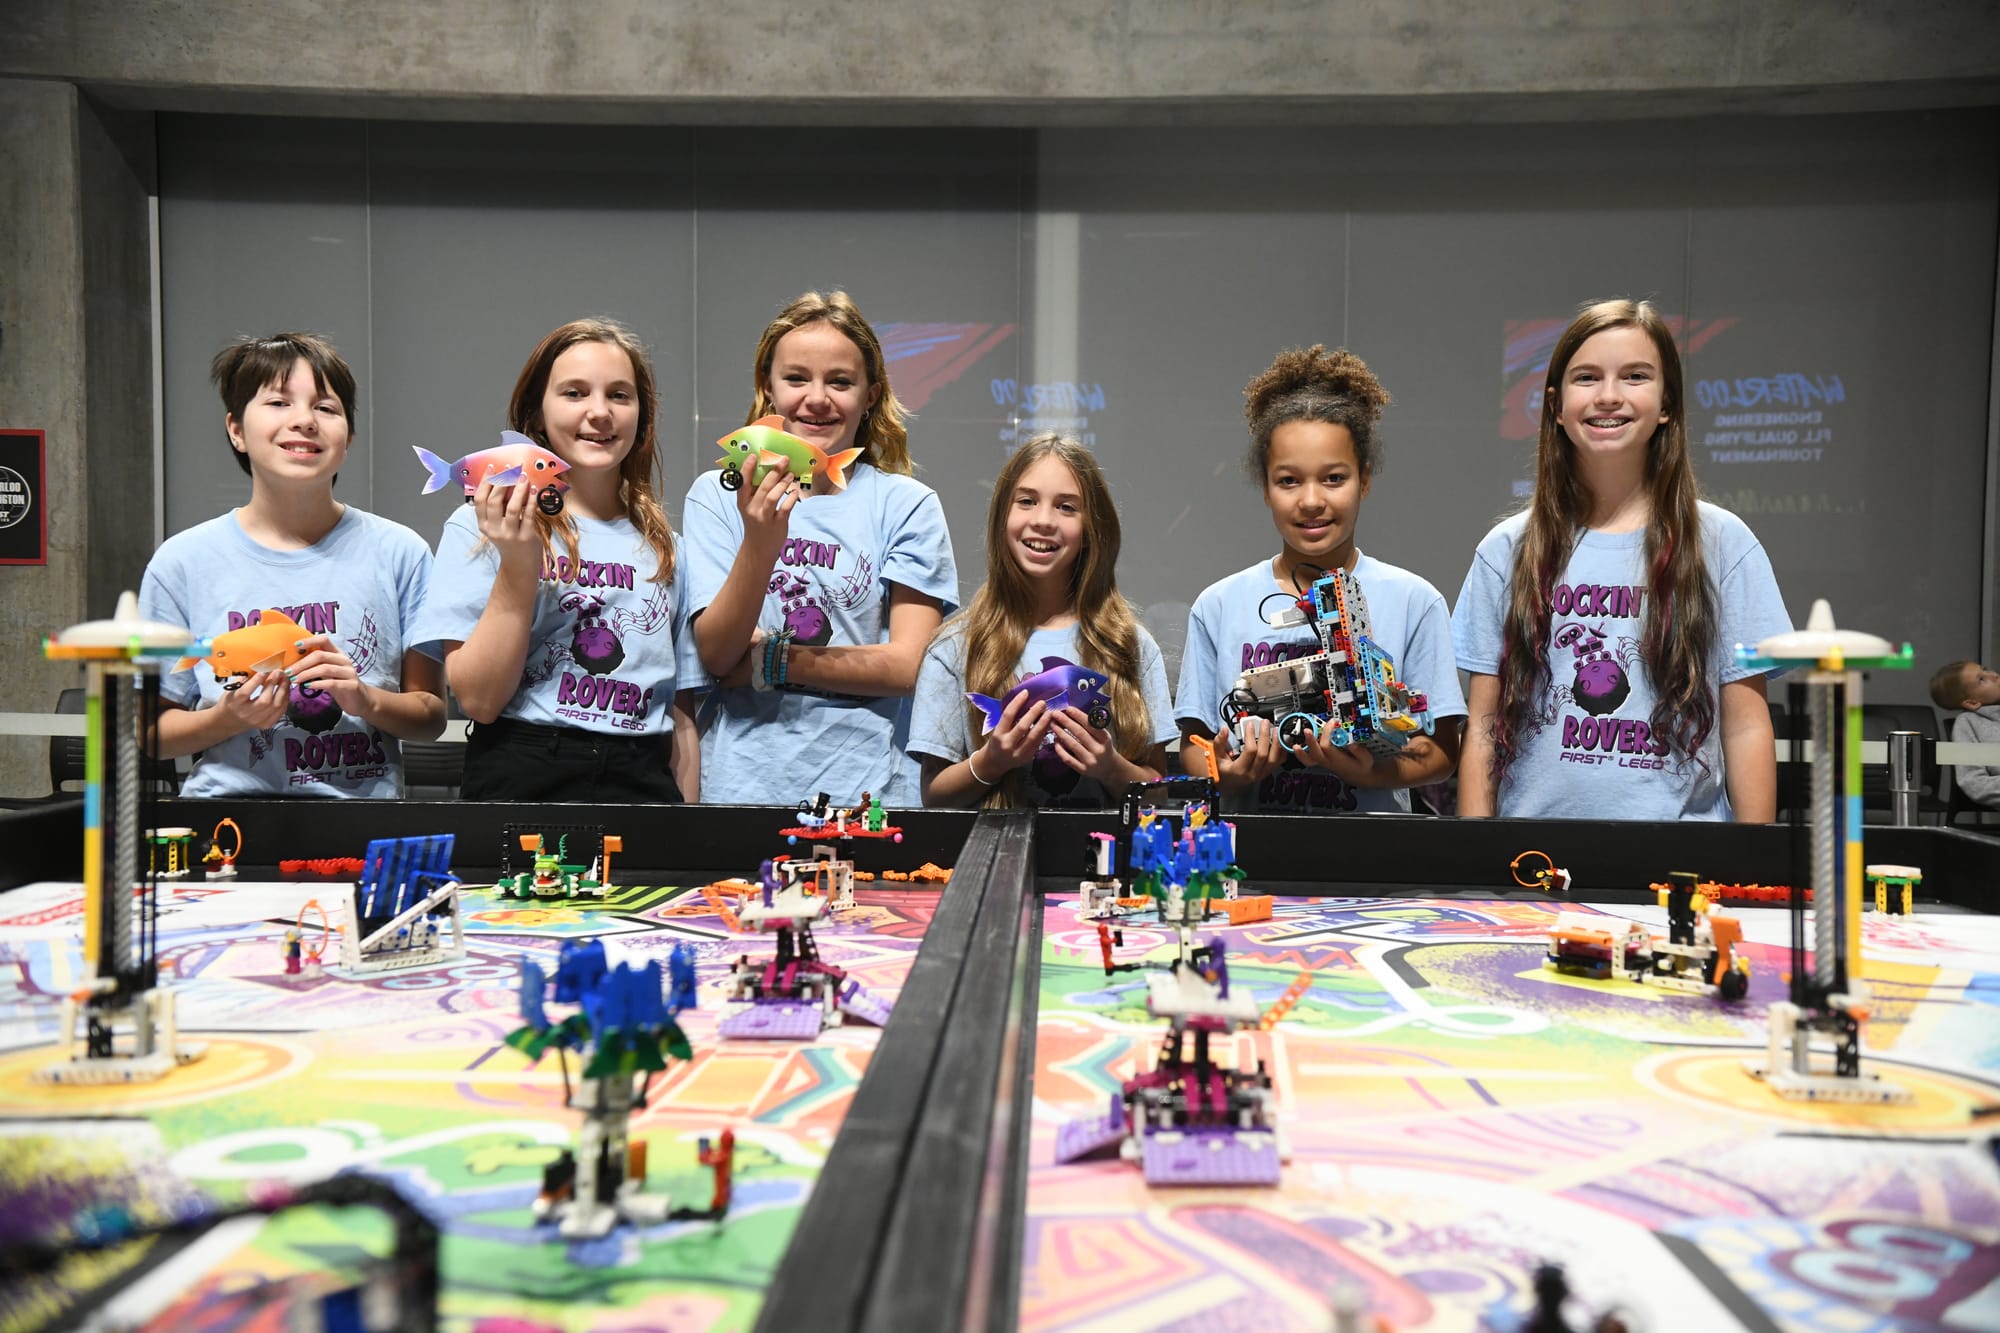 Girls take on engineering challenges in Lego robotics competition